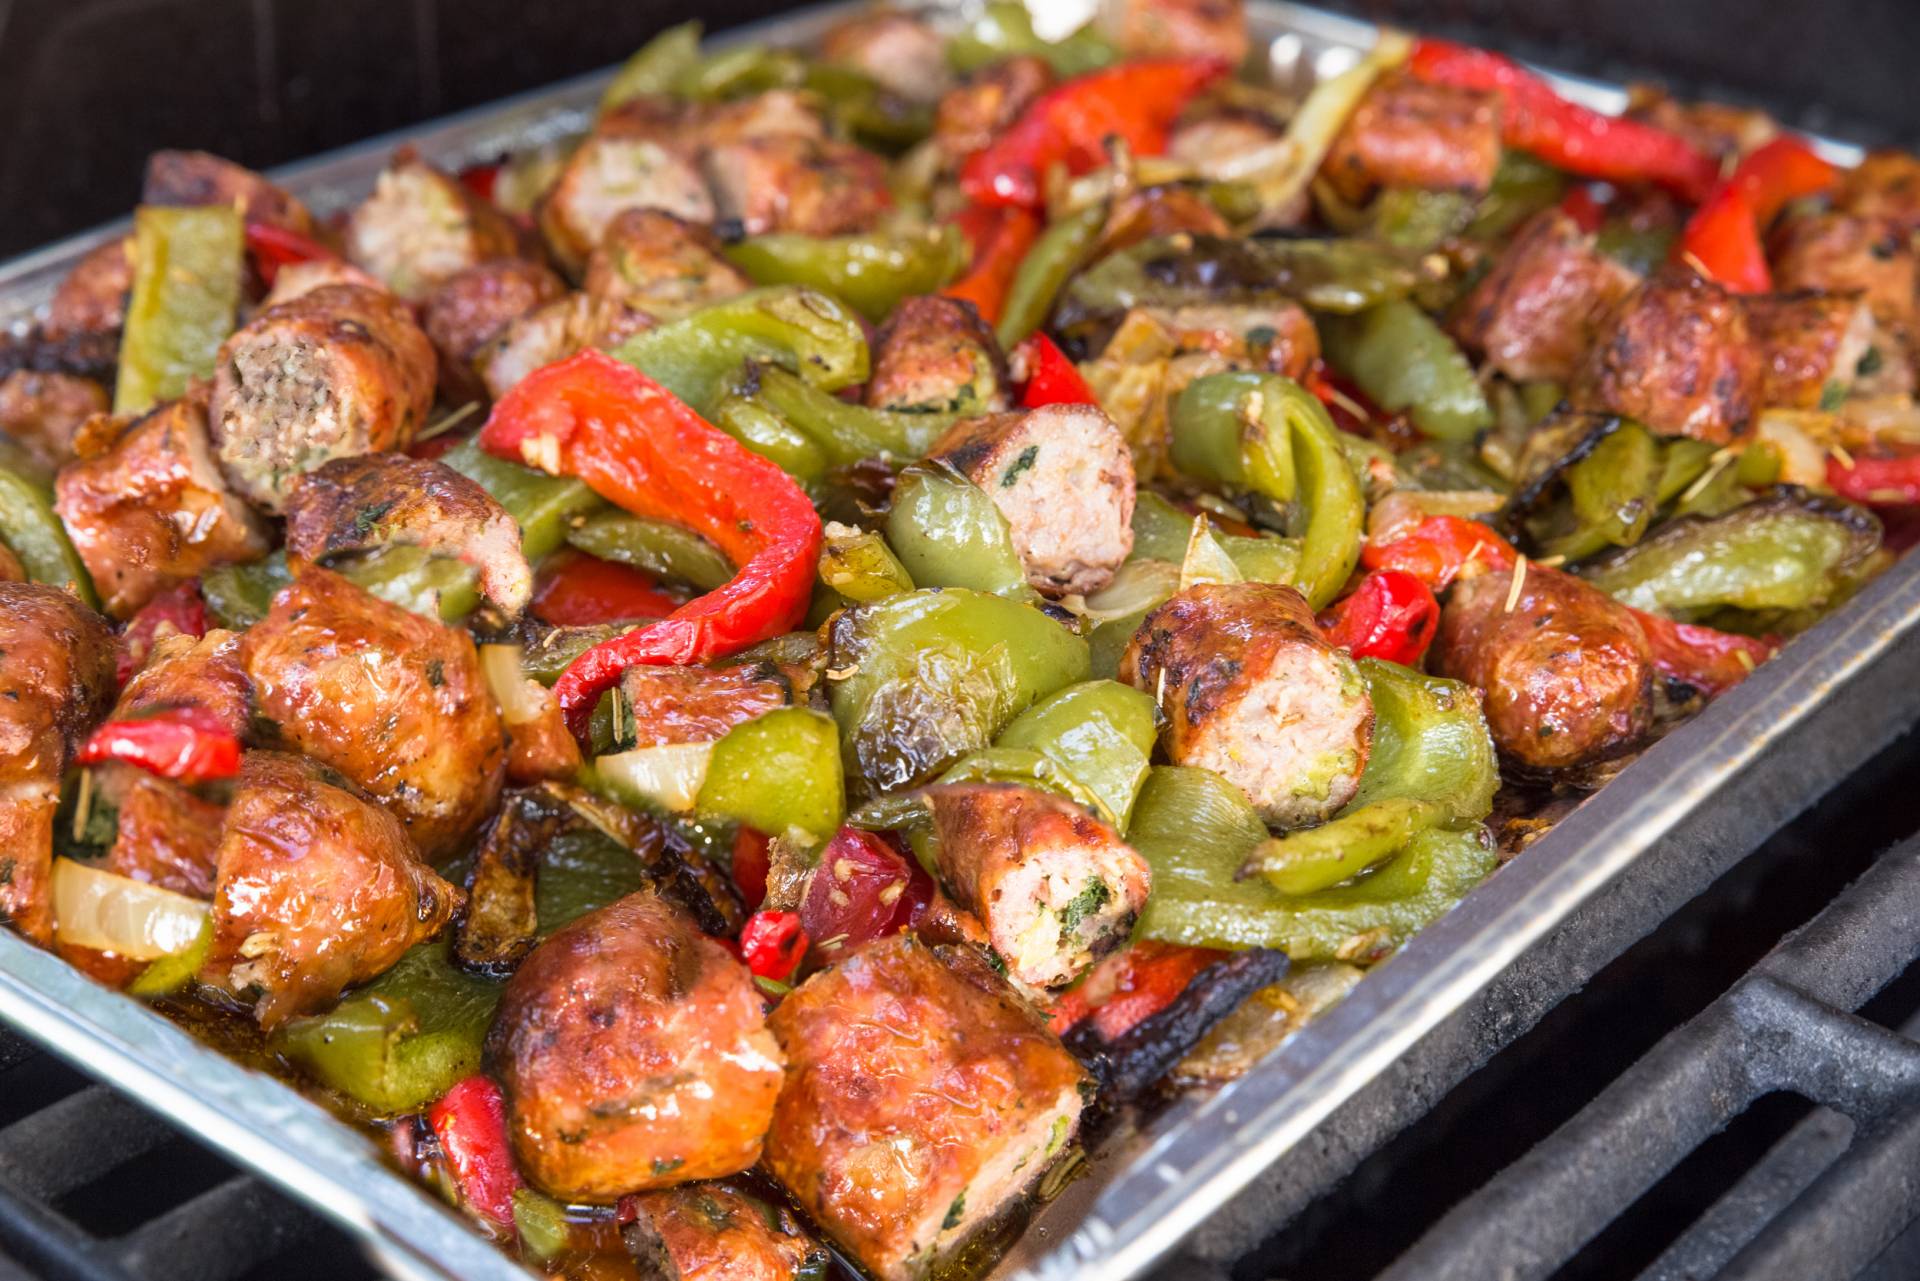 Party Size Italian Sausage with Peppers & Onions